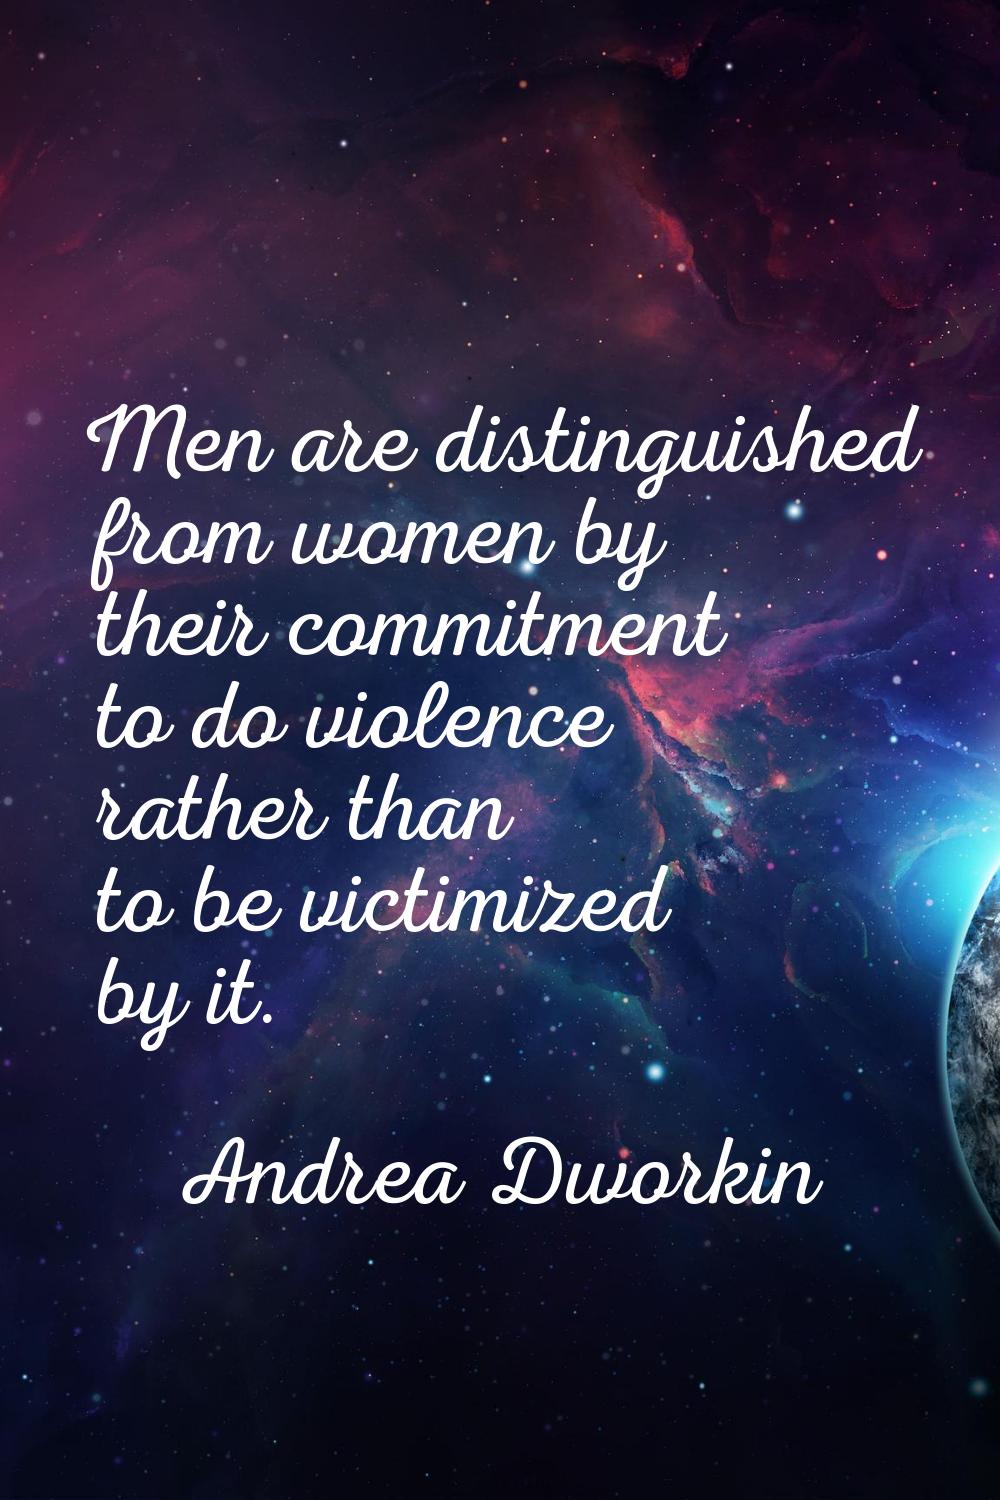 Men are distinguished from women by their commitment to do violence rather than to be victimized by